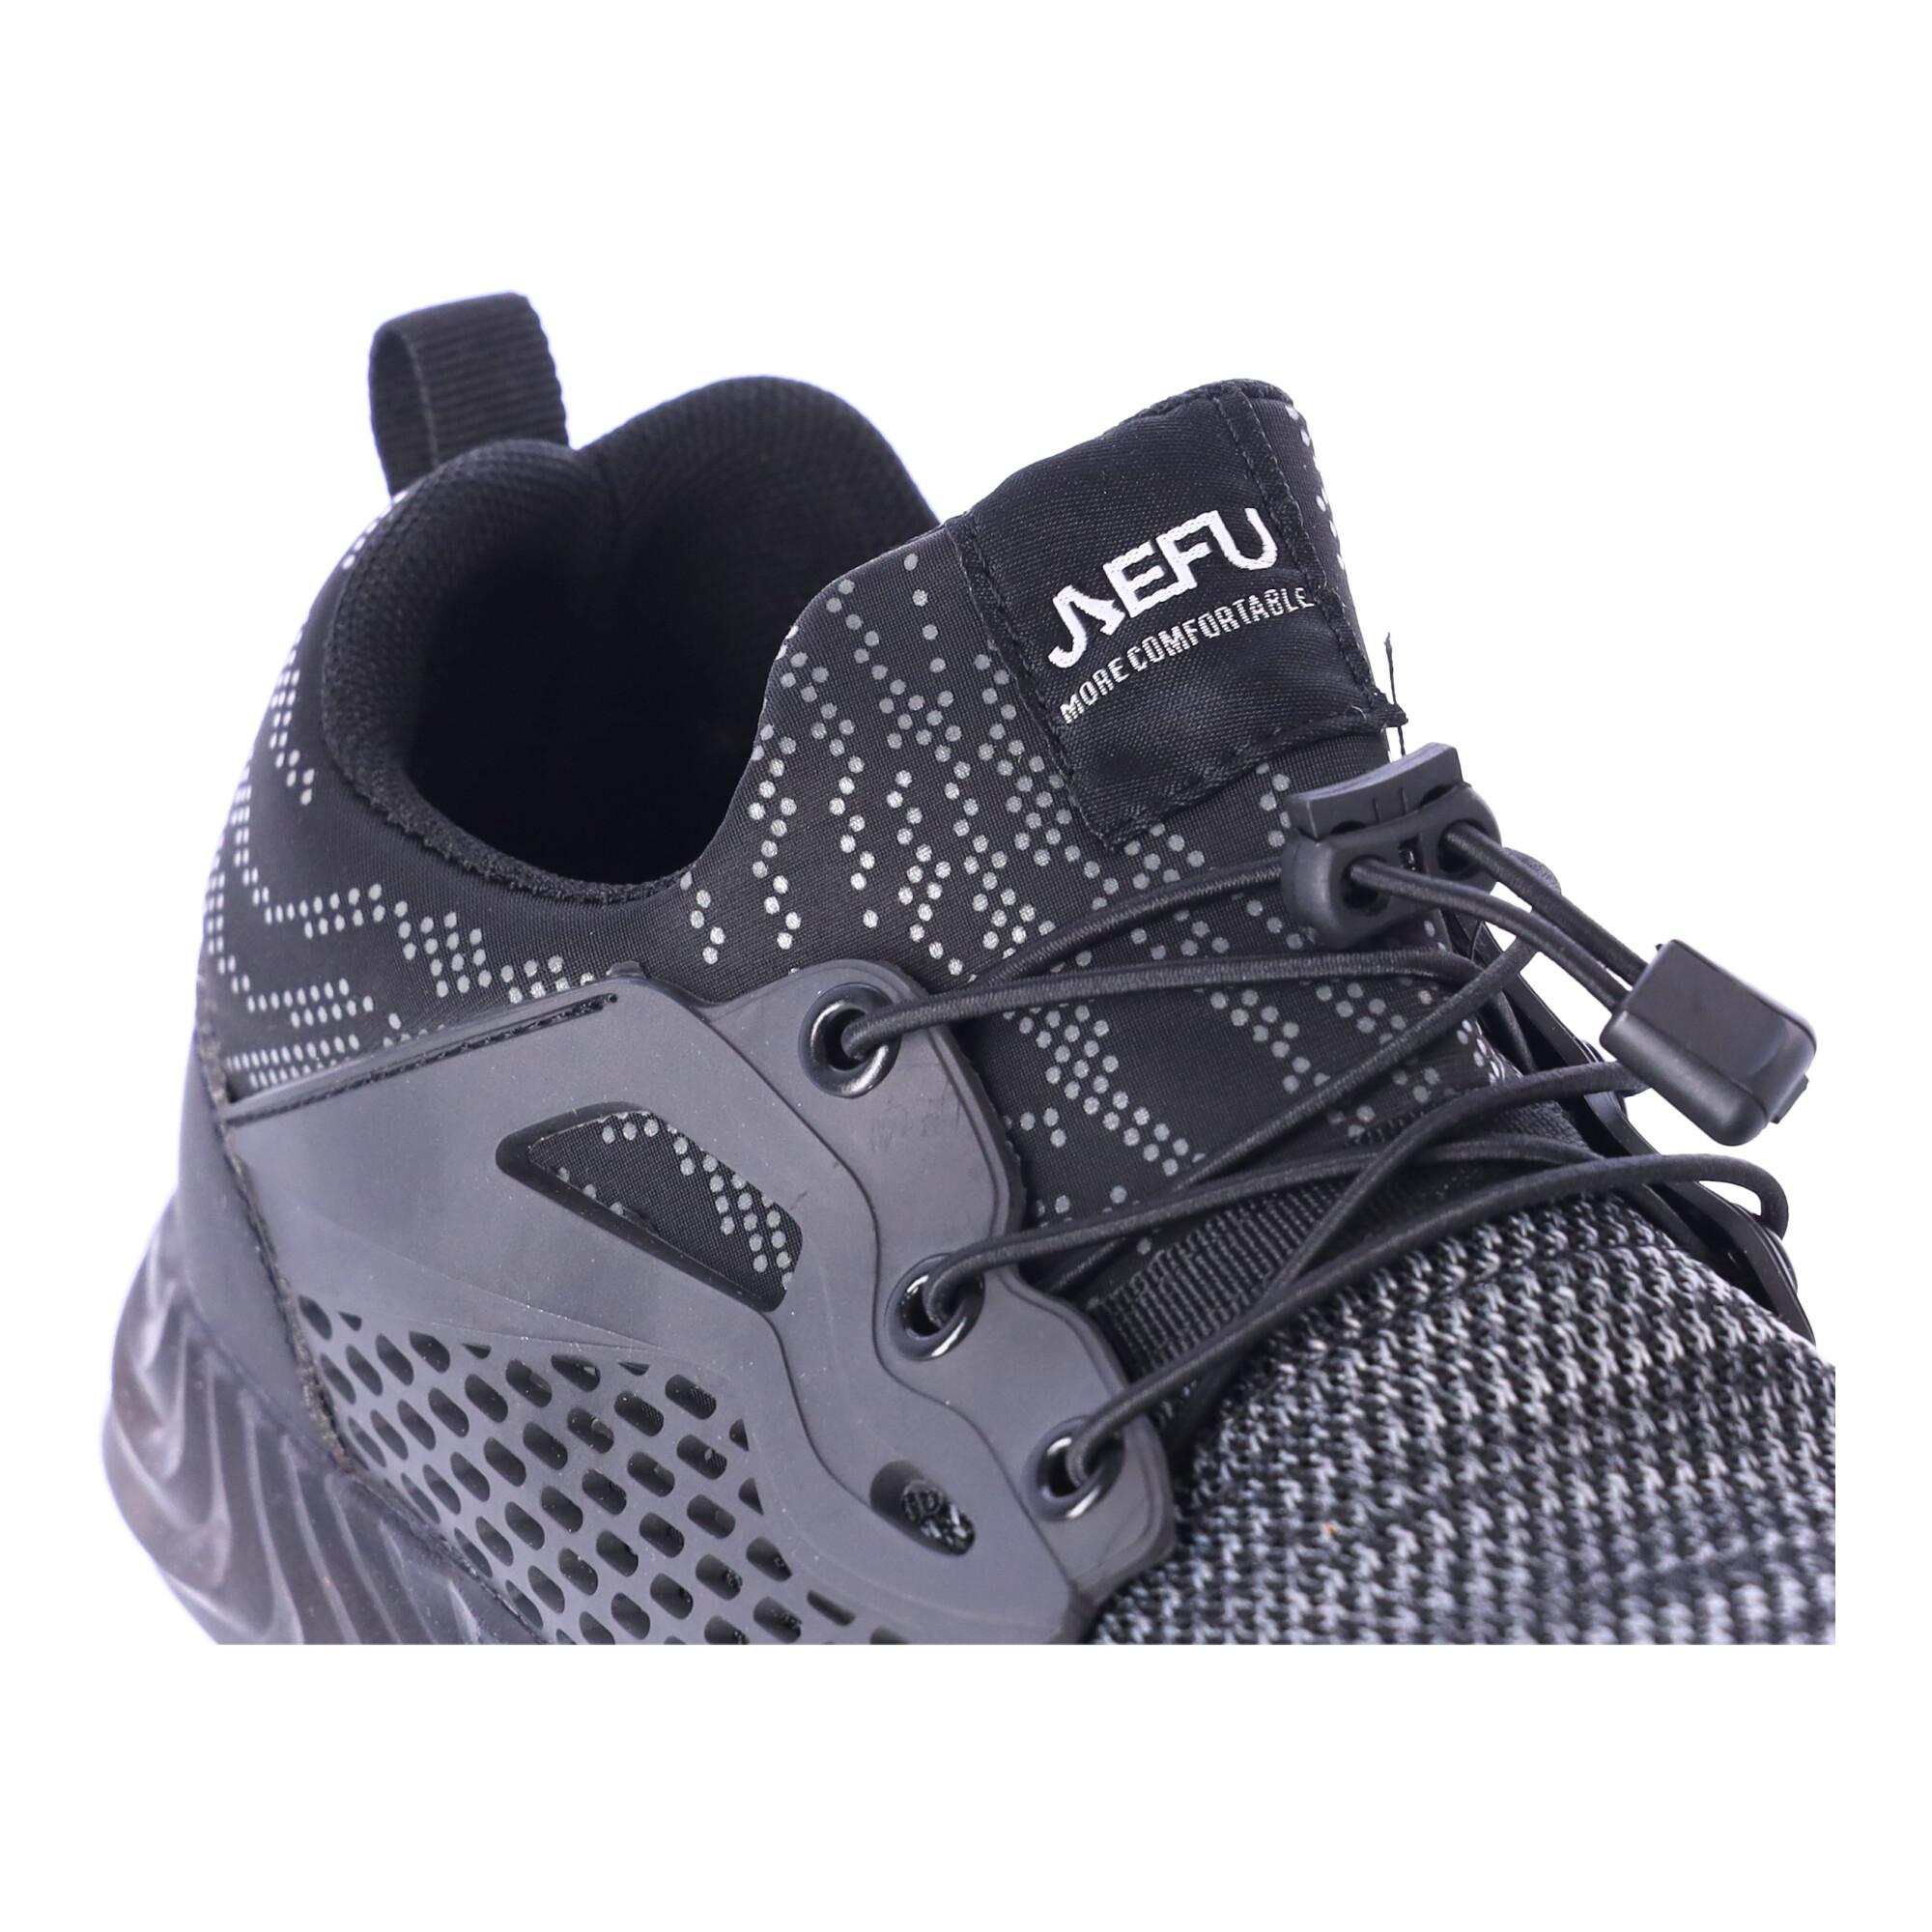 Work safety shoes "41" - gray